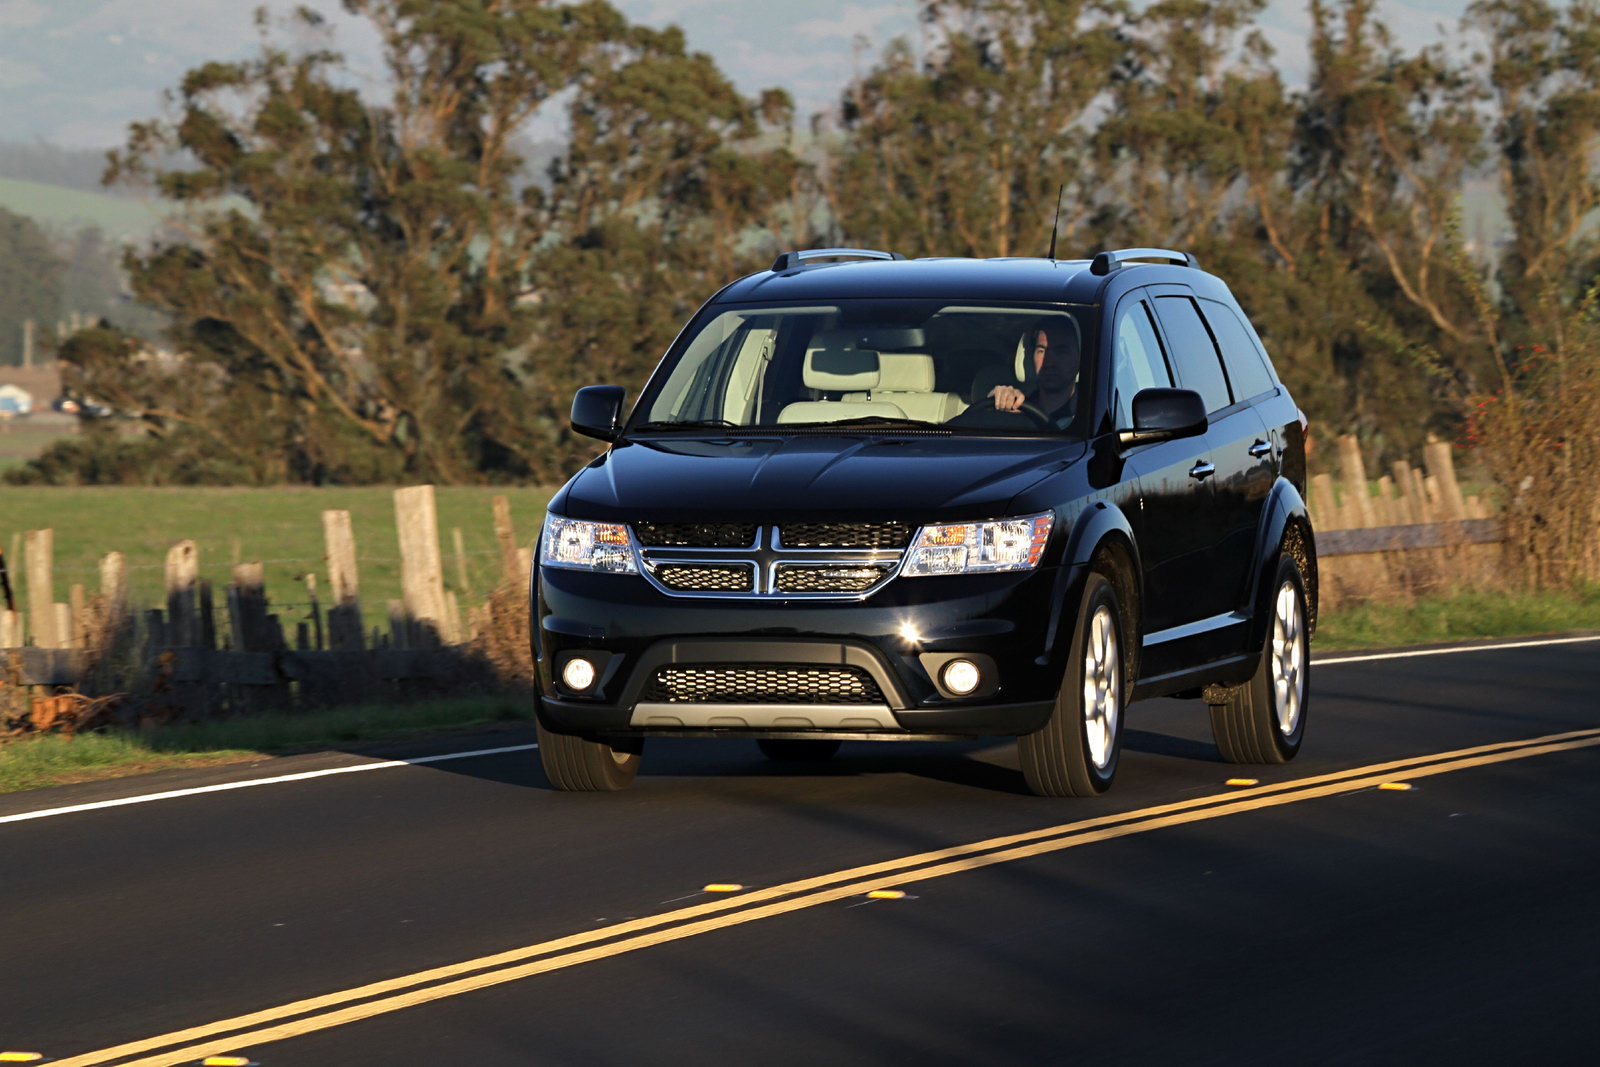 Fiat Freemont (Dodge Journey) Spares Father From Soccer-Mum Fate